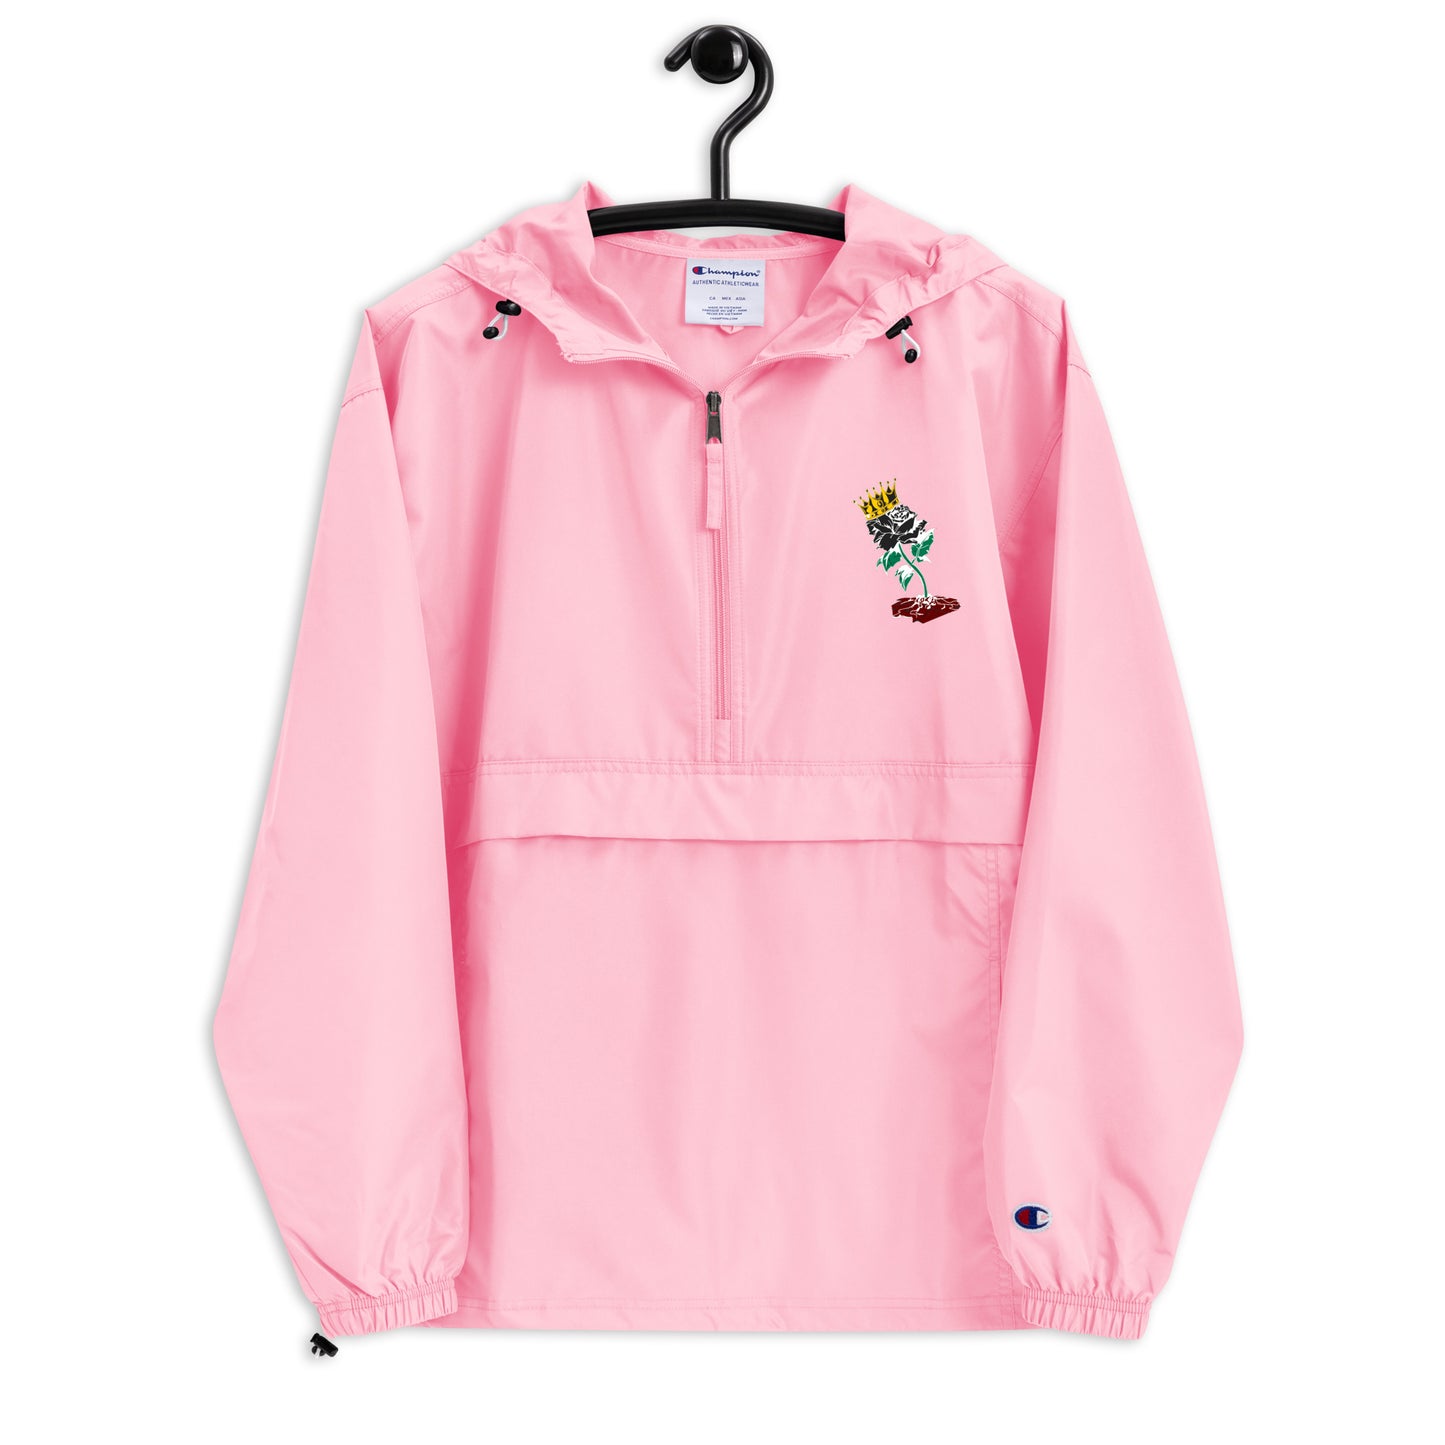 Black Rose Embroidered Champion Packable Jacket